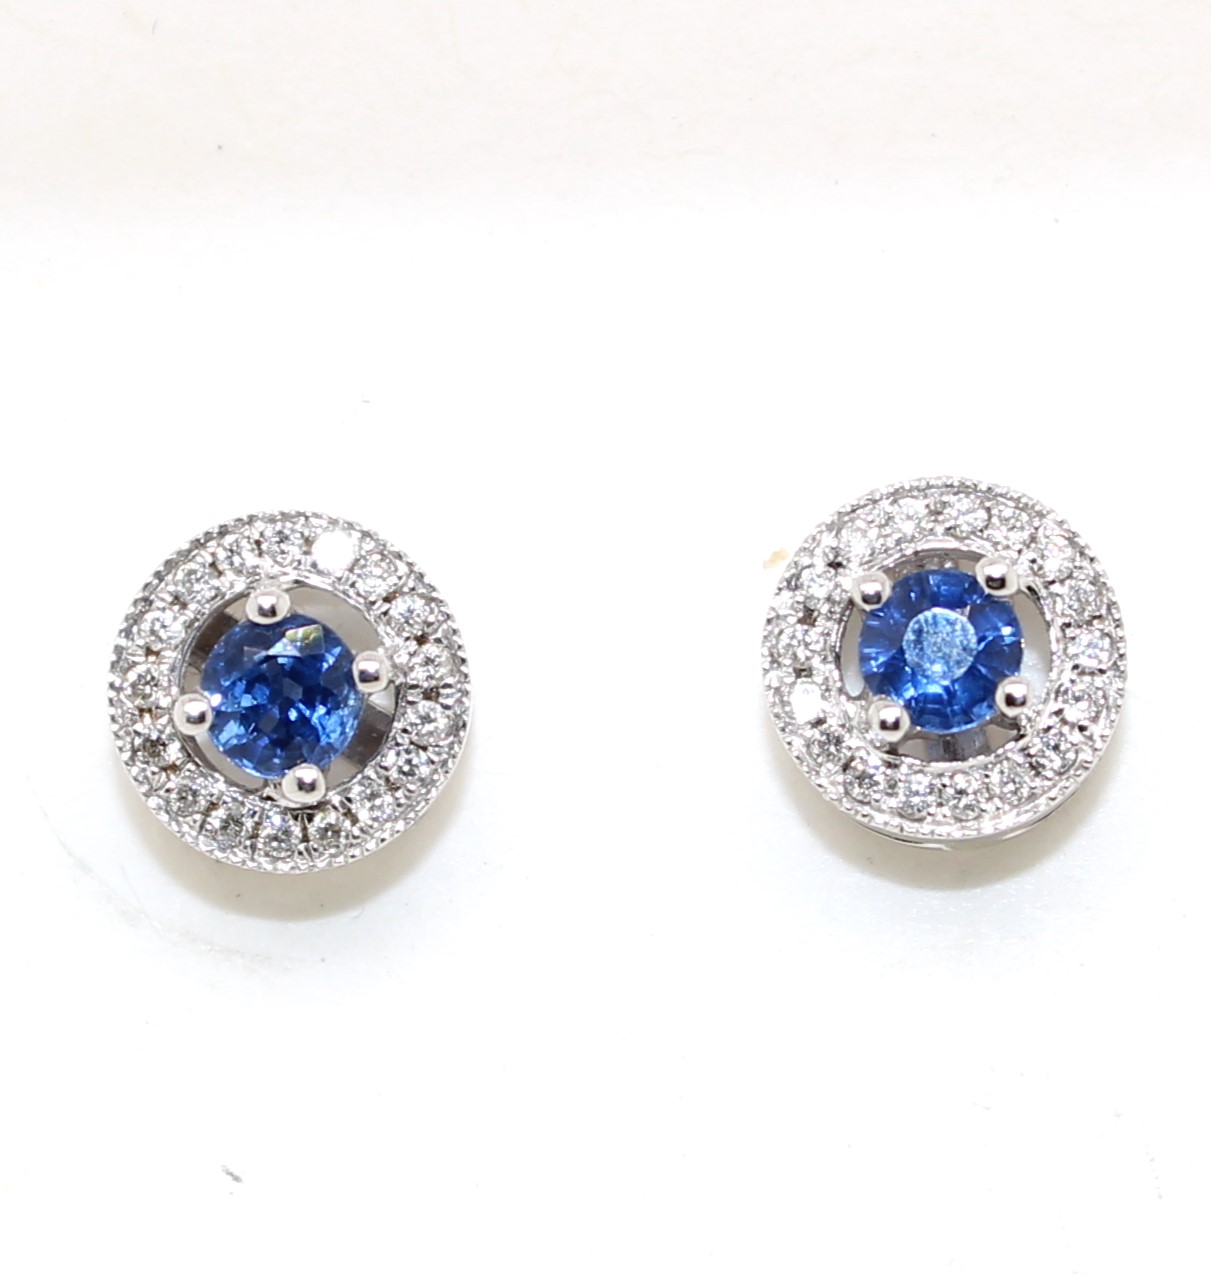 Each earring contains 1 round cut sapphire prong set in the center surrounded by 17 full cut prong set diamonds. post and friction backs. 2 sapphires = .58 carat 34 diamonds = .15 c